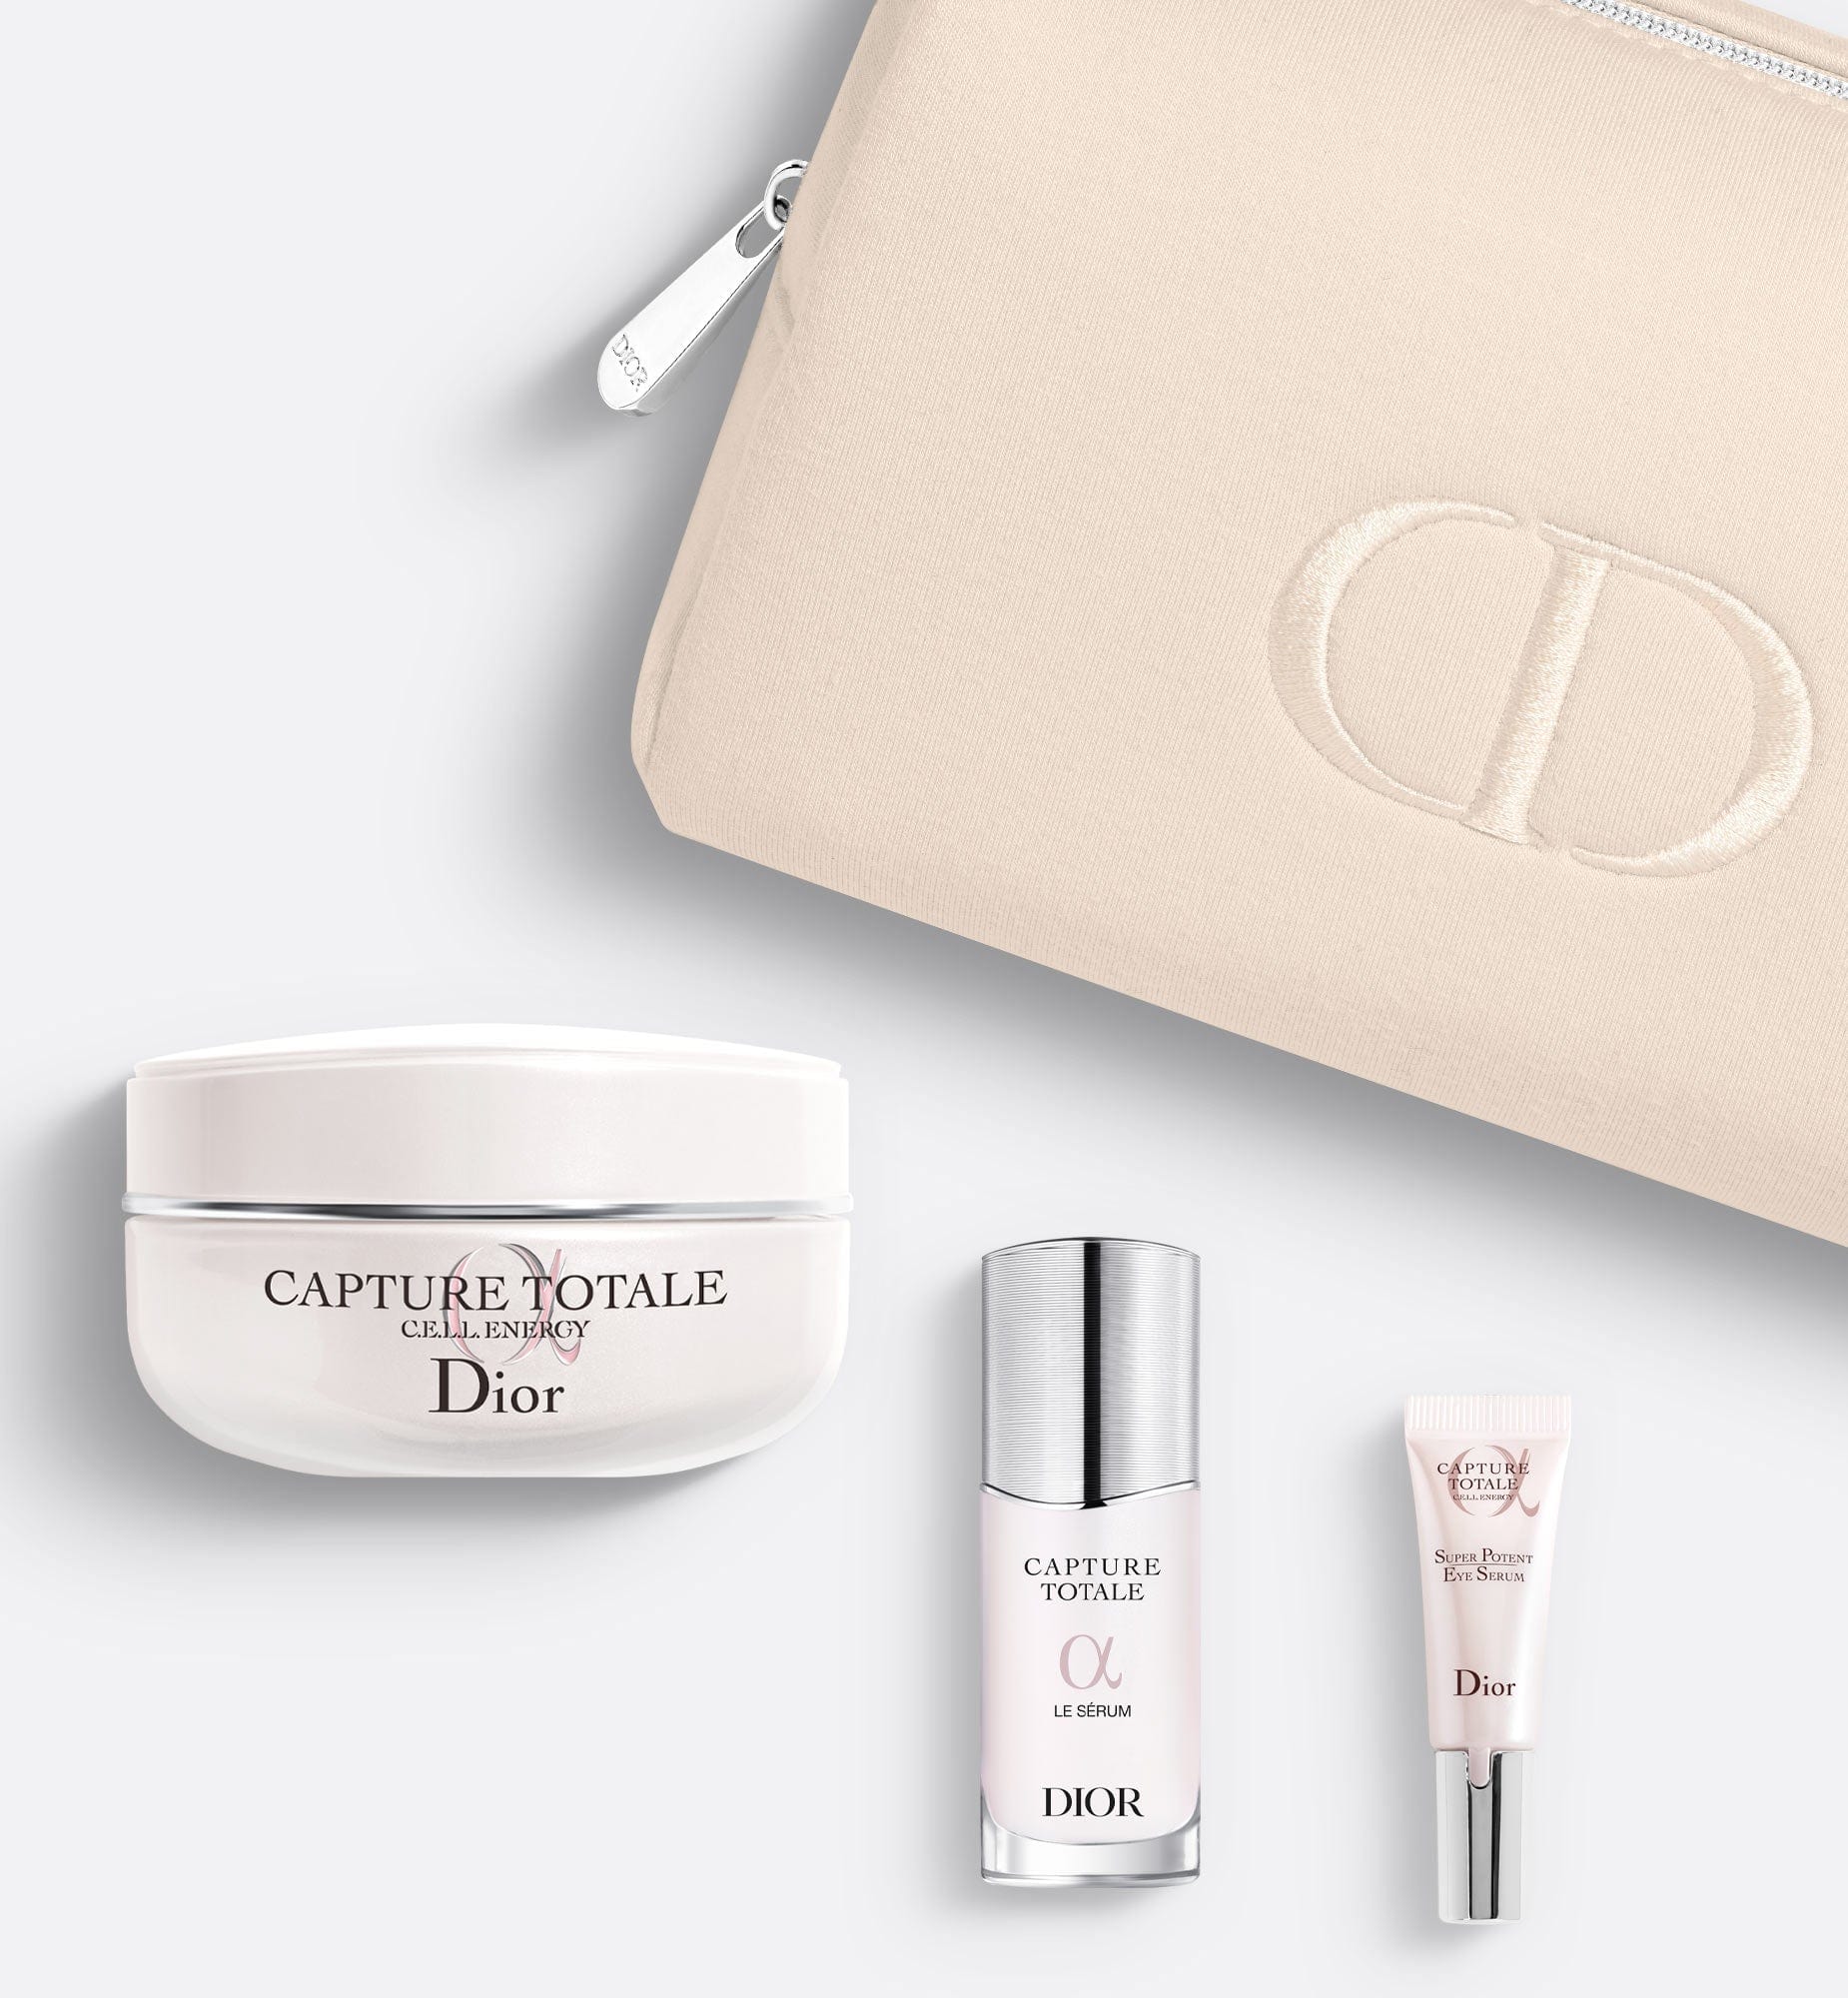 Capture Totale Firming & Wrinkle-Correcting Creme Set | The Youth-Revealing Ritual - Selection of 3 Firming Skincare Products